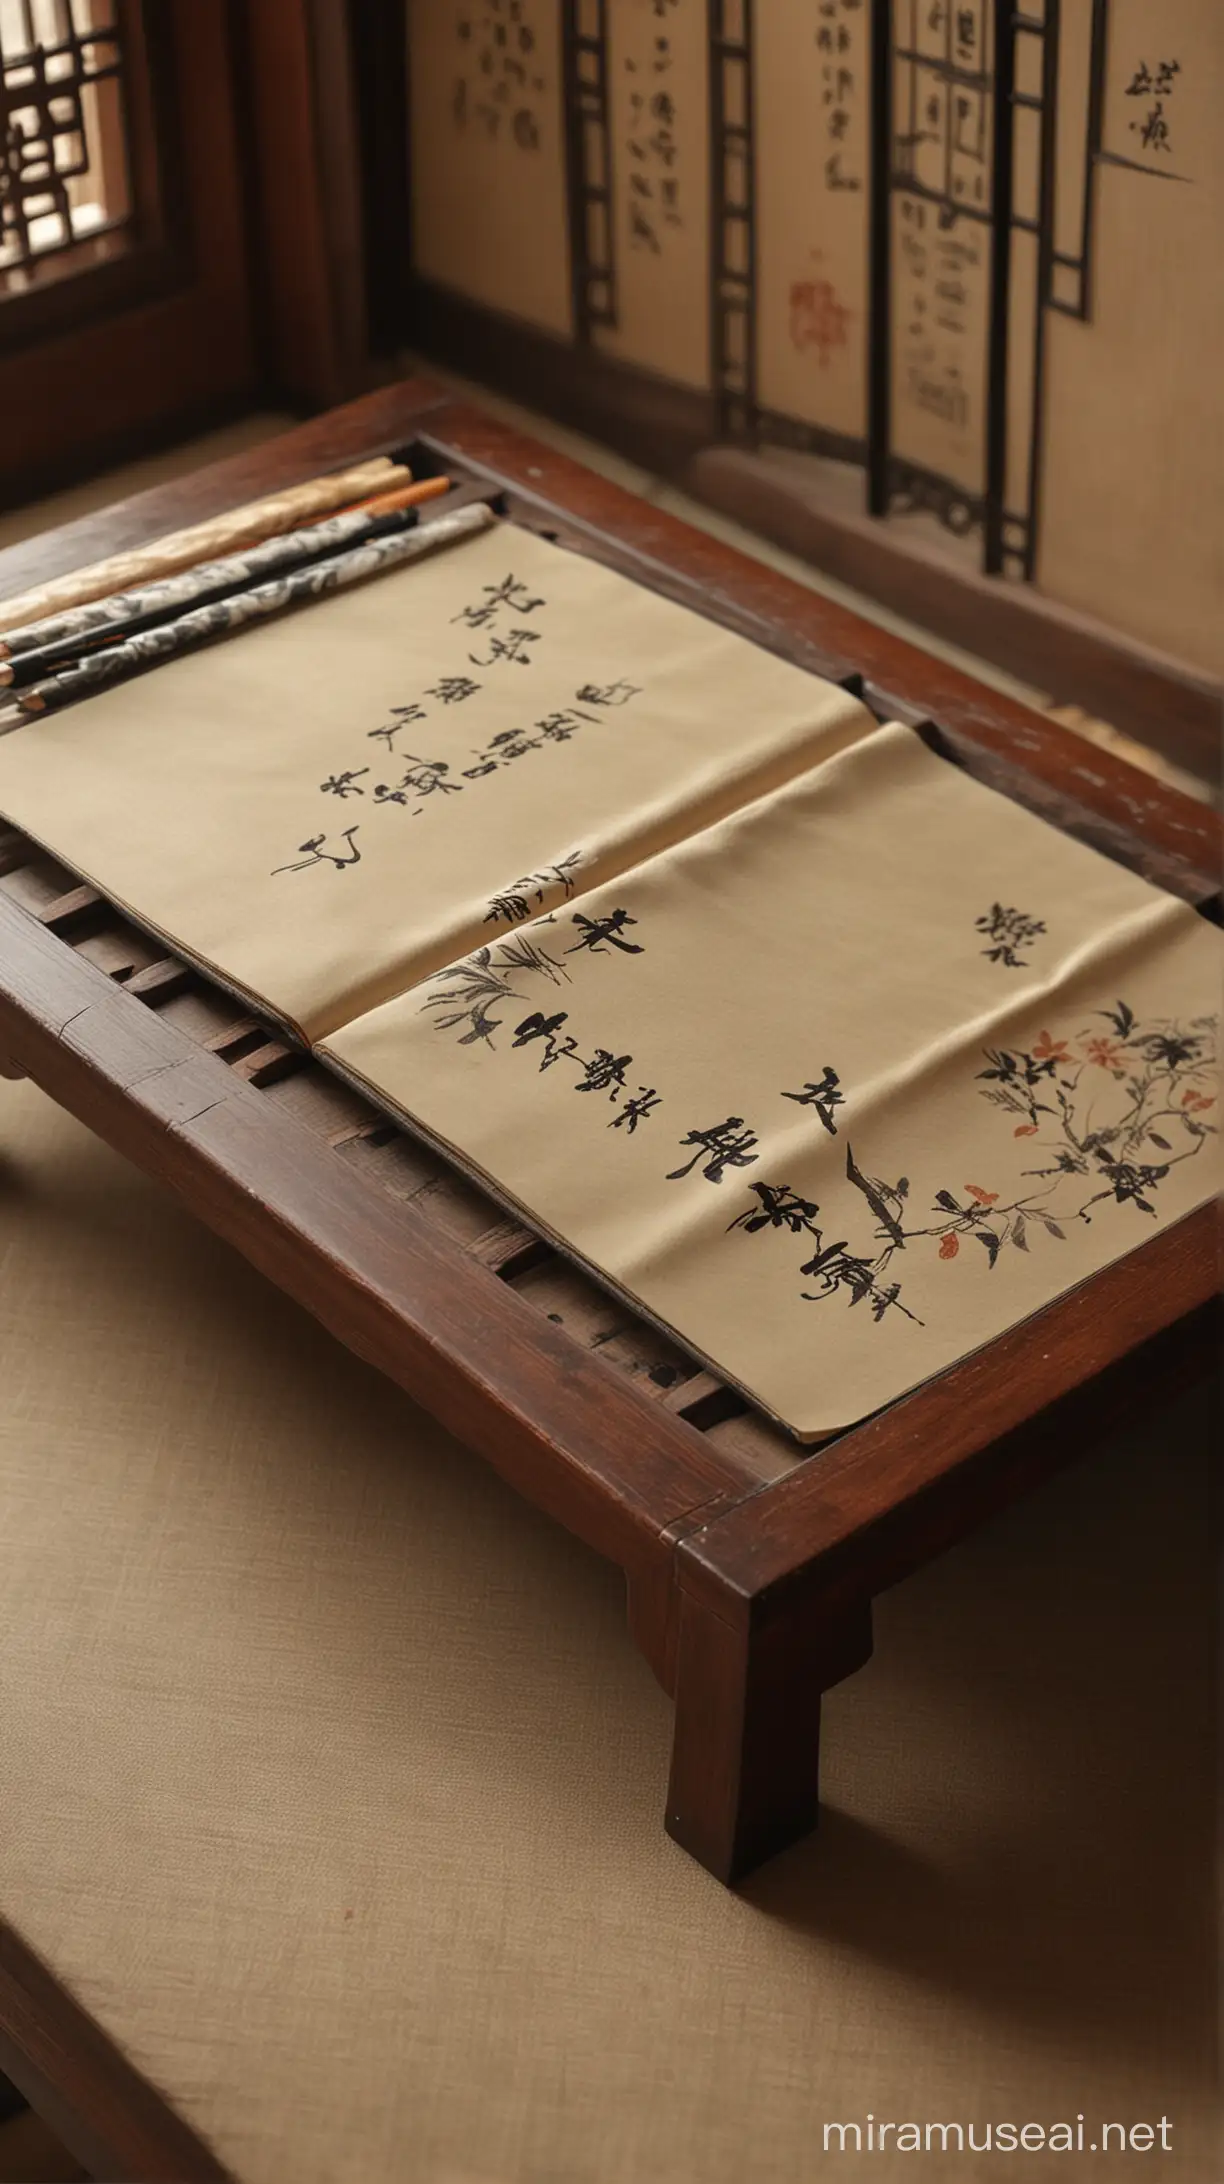 CloseUp on Traditional Chinese Inkstone with Fading Light in a Serene Study Room